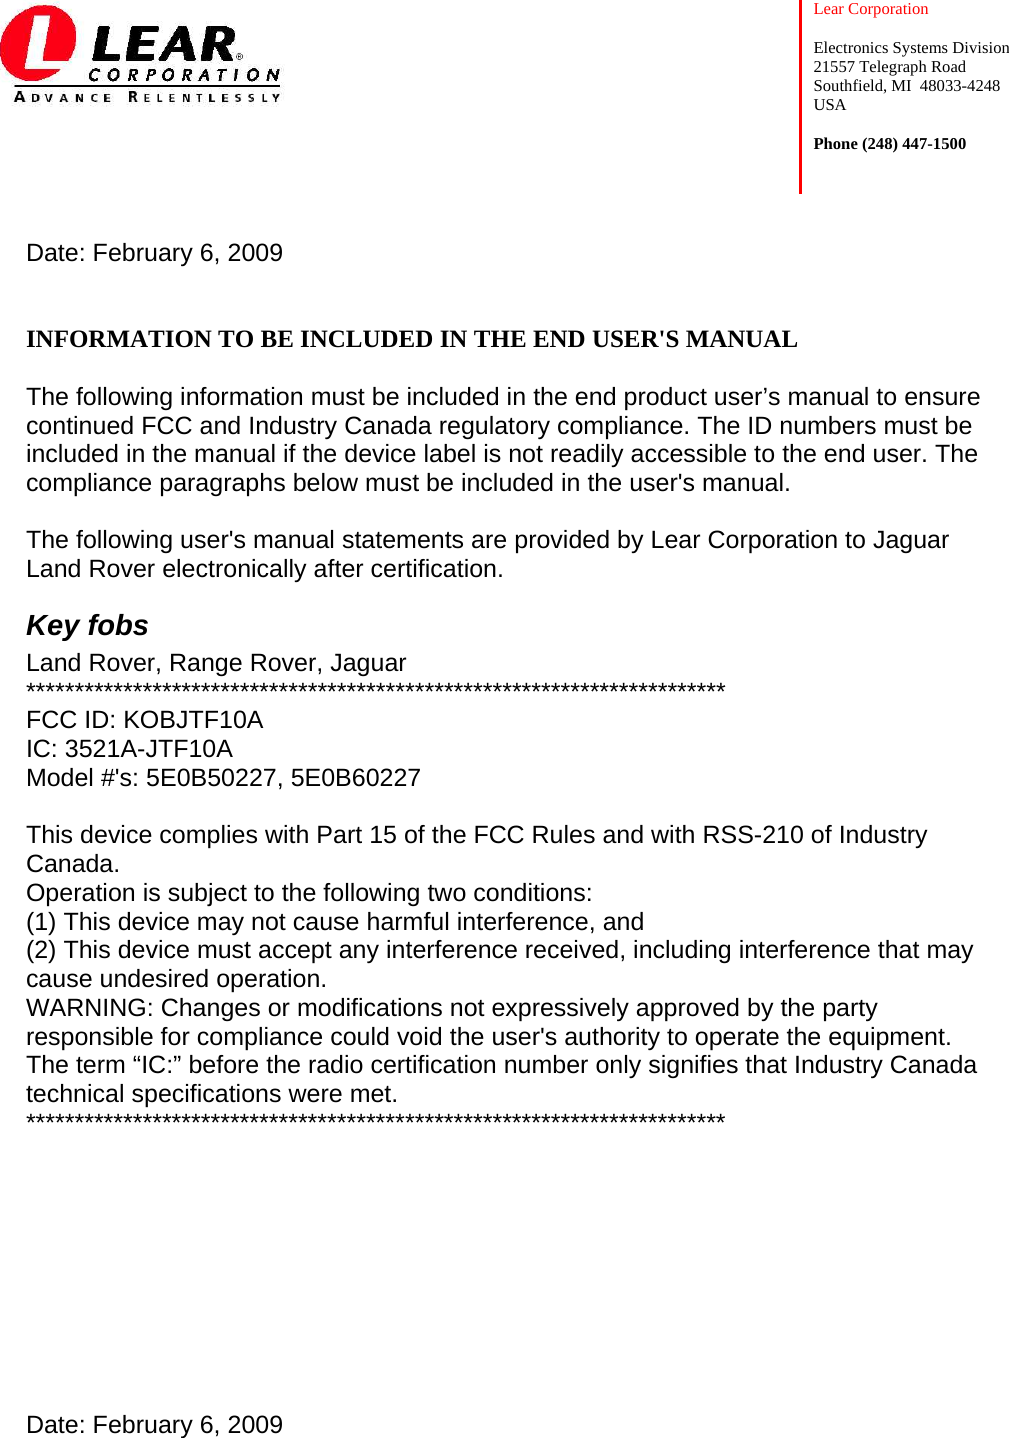    Lear Corporation  Electronics Systems Division 21557 Telegraph Road Southfield, MI  48033-4248 USA  Phone (248) 447-1500          Date: February 6, 2009   INFORMATION TO BE INCLUDED IN THE END USER&apos;S MANUAL  The following information must be included in the end product user’s manual to ensure continued FCC and Industry Canada regulatory compliance. The ID numbers must be included in the manual if the device label is not readily accessible to the end user. The compliance paragraphs below must be included in the user&apos;s manual.  The following user&apos;s manual statements are provided by Lear Corporation to Jaguar Land Rover electronically after certification. Key fobs Land Rover, Range Rover, Jaguar ************************************************************************ FCC ID: KOBJTF10A  IC: 3521A-JTF10A Model #&apos;s: 5E0B50227, 5E0B60227  This device complies with Part 15 of the FCC Rules and with RSS-210 of Industry Canada. Operation is subject to the following two conditions: (1) This device may not cause harmful interference, and (2) This device must accept any interference received, including interference that may cause undesired operation. WARNING: Changes or modifications not expressively approved by the party responsible for compliance could void the user&apos;s authority to operate the equipment. The term “IC:” before the radio certification number only signifies that Industry Canada technical specifications were met. ************************************************************************        Date: February 6, 2009   